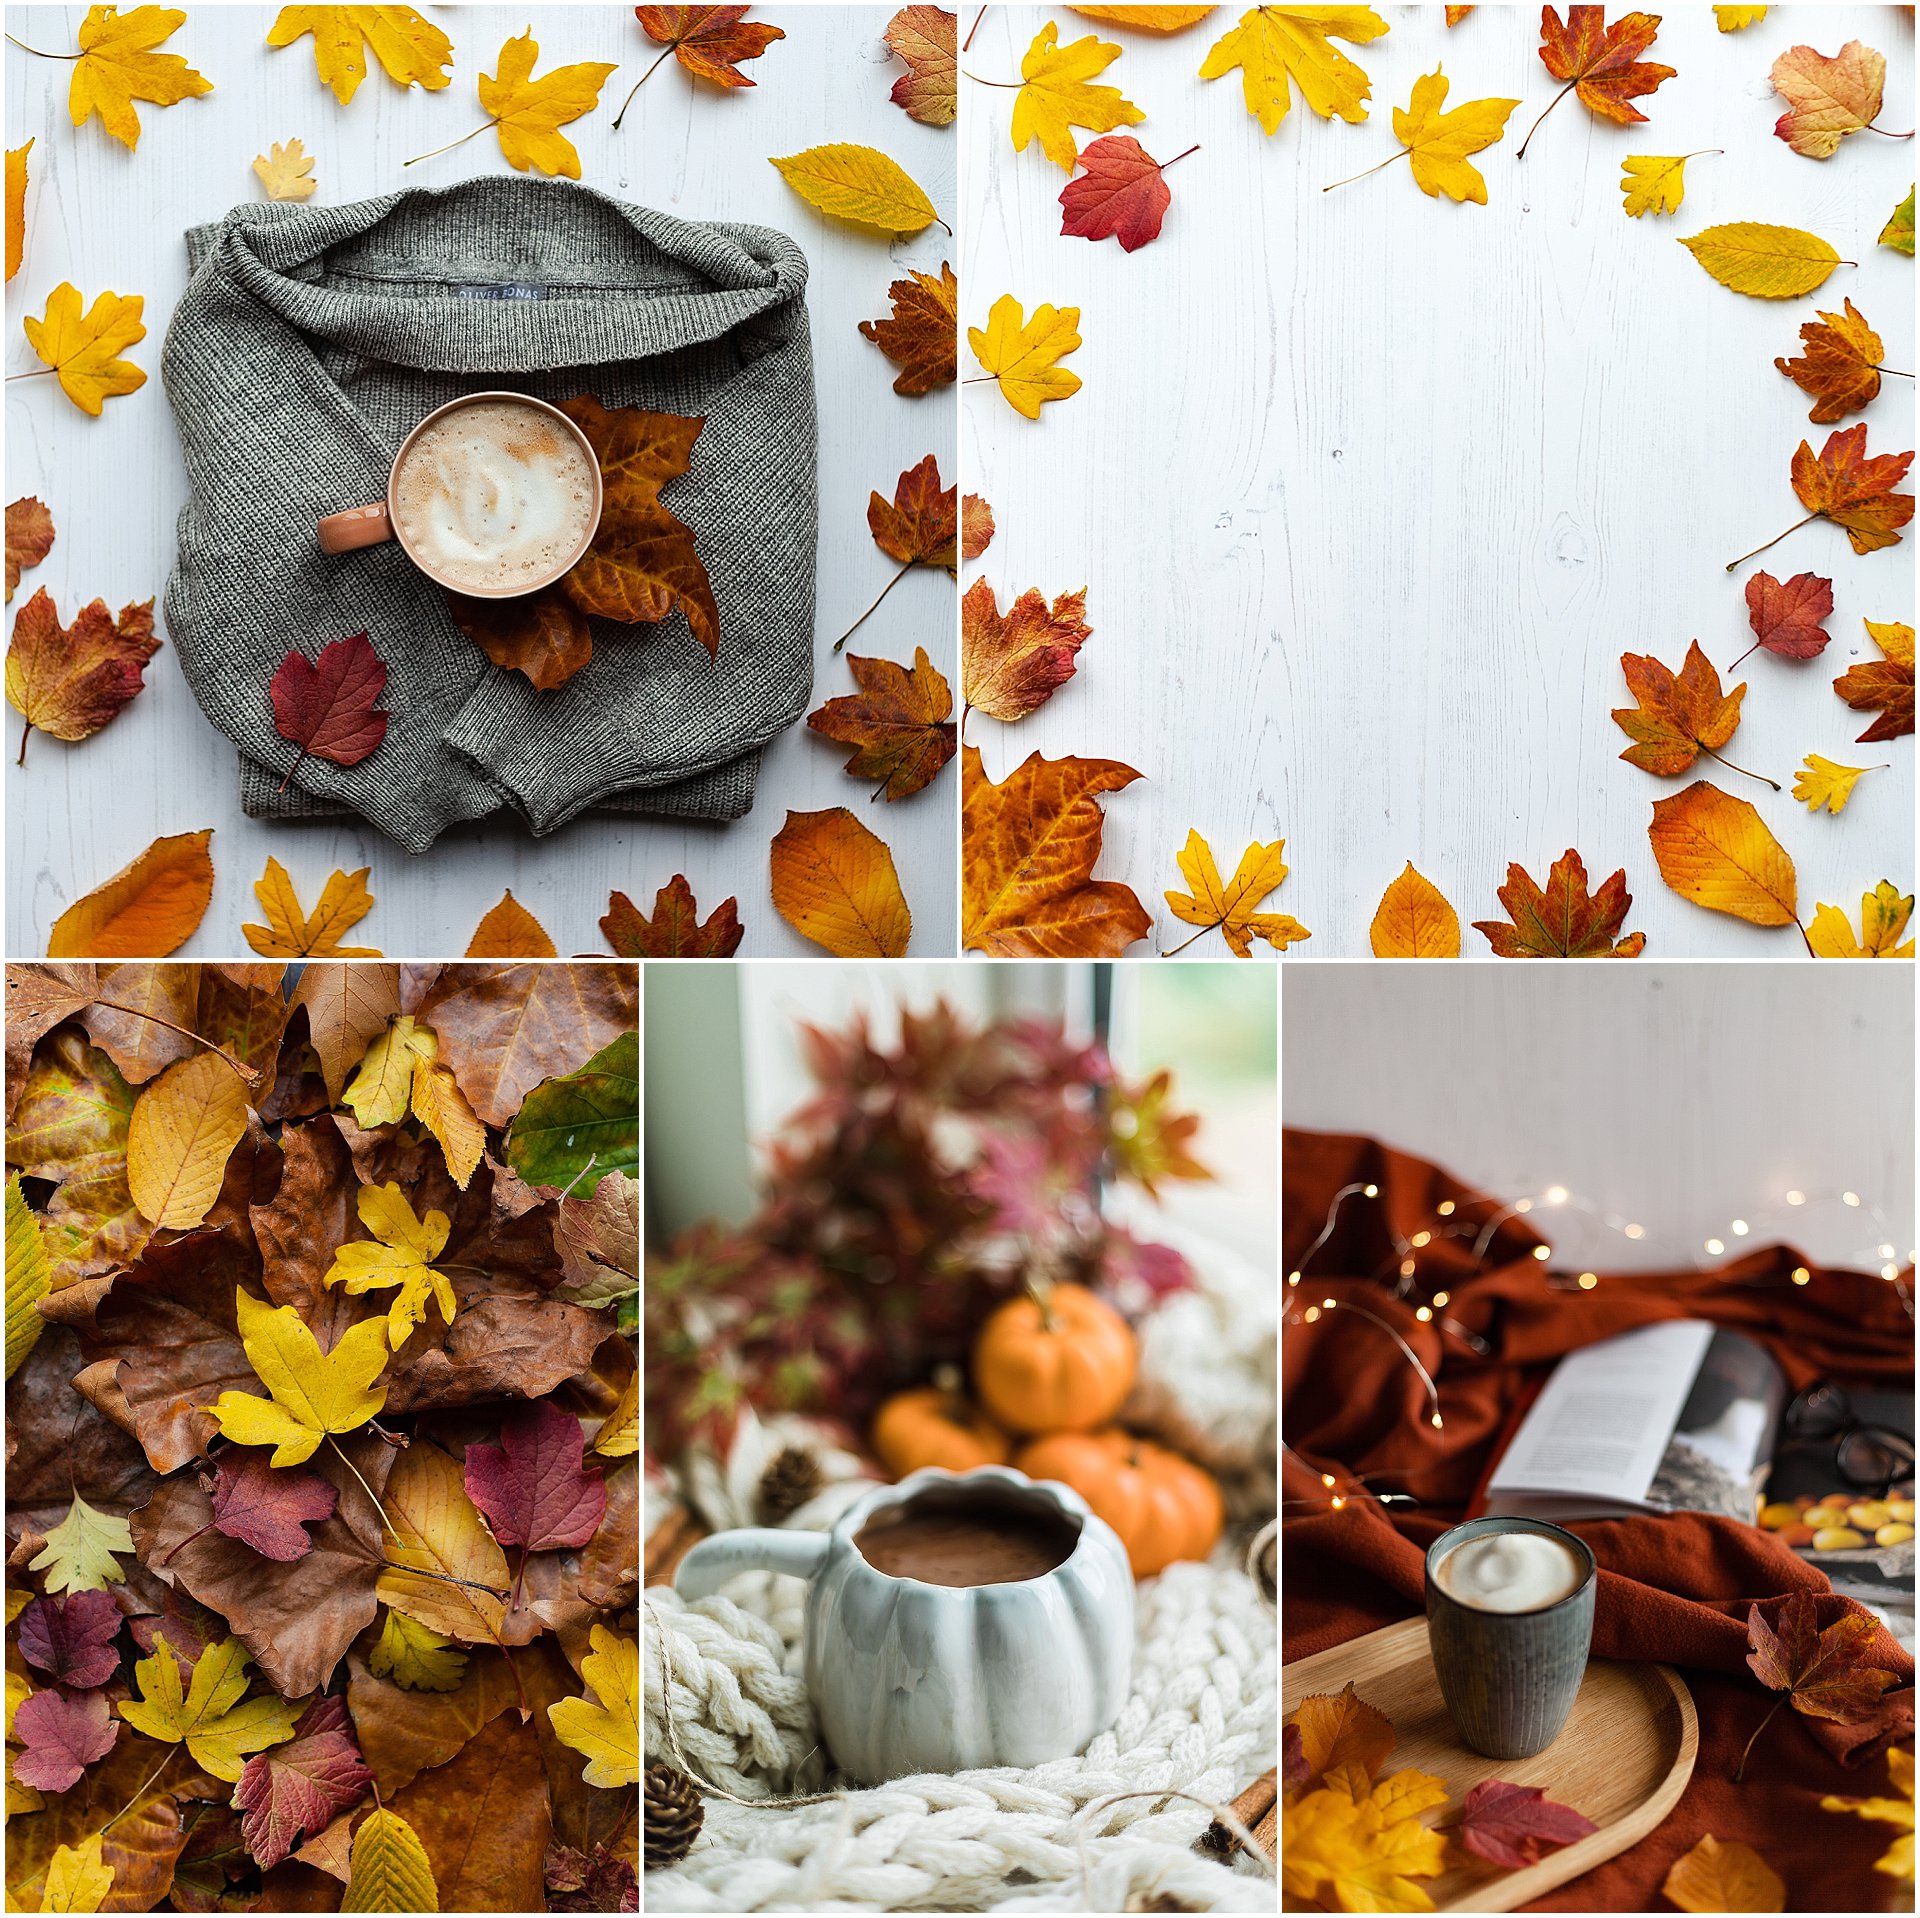 Autumnal stock images of coffees, leaves and knitted jumpers by London brand photographer AKP Branding Stories